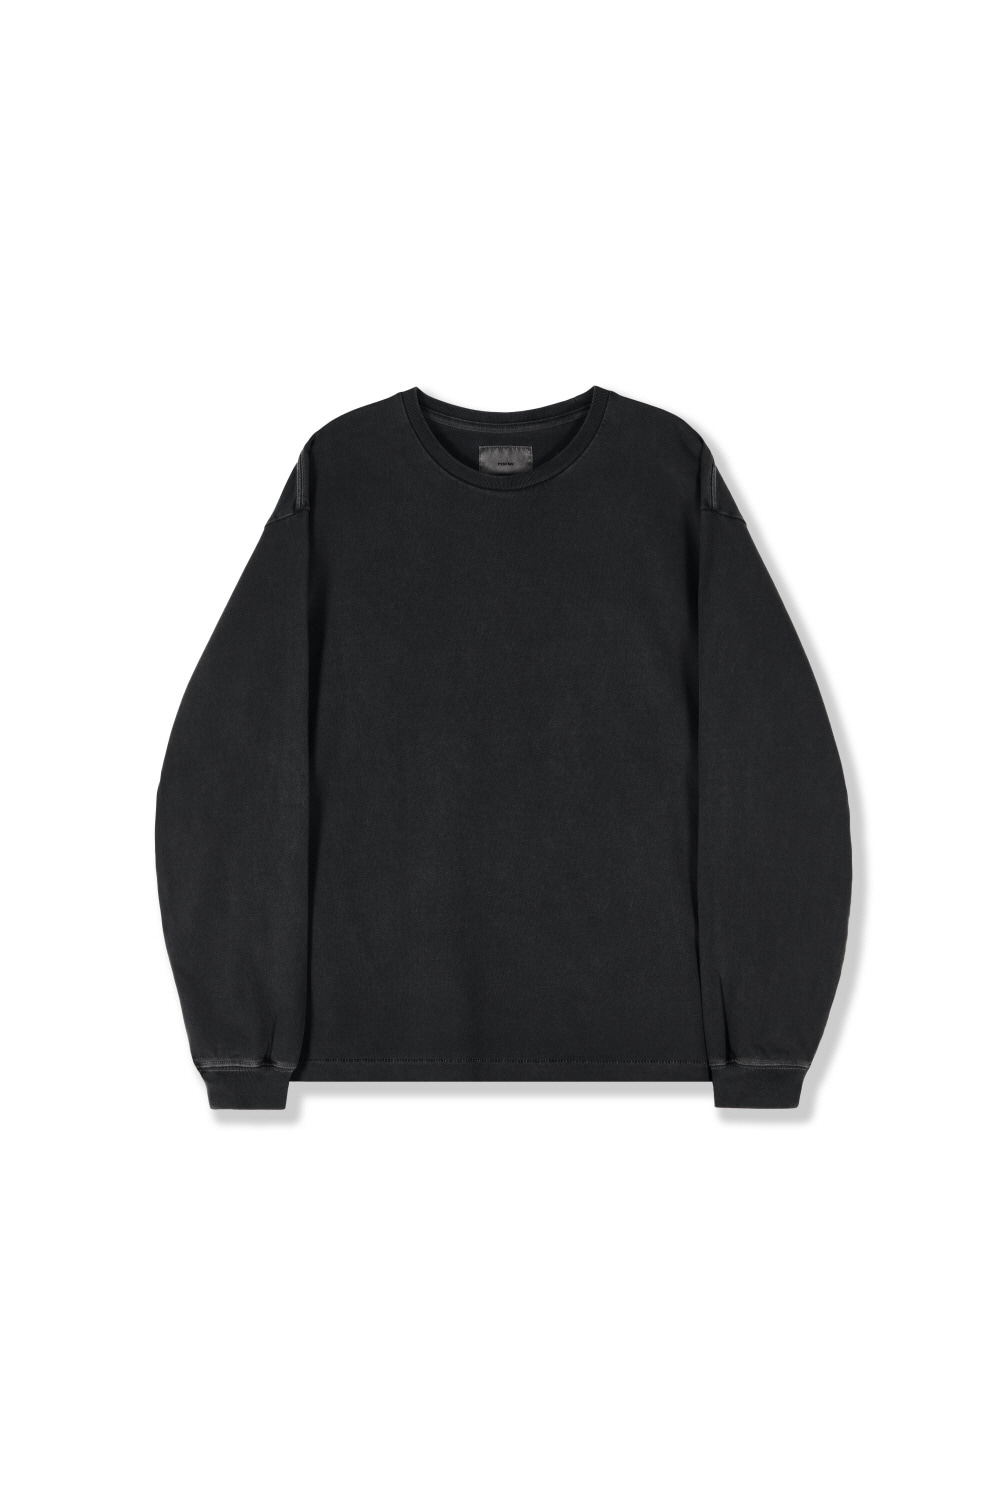 pigment dyed long sleeves_charcoal black